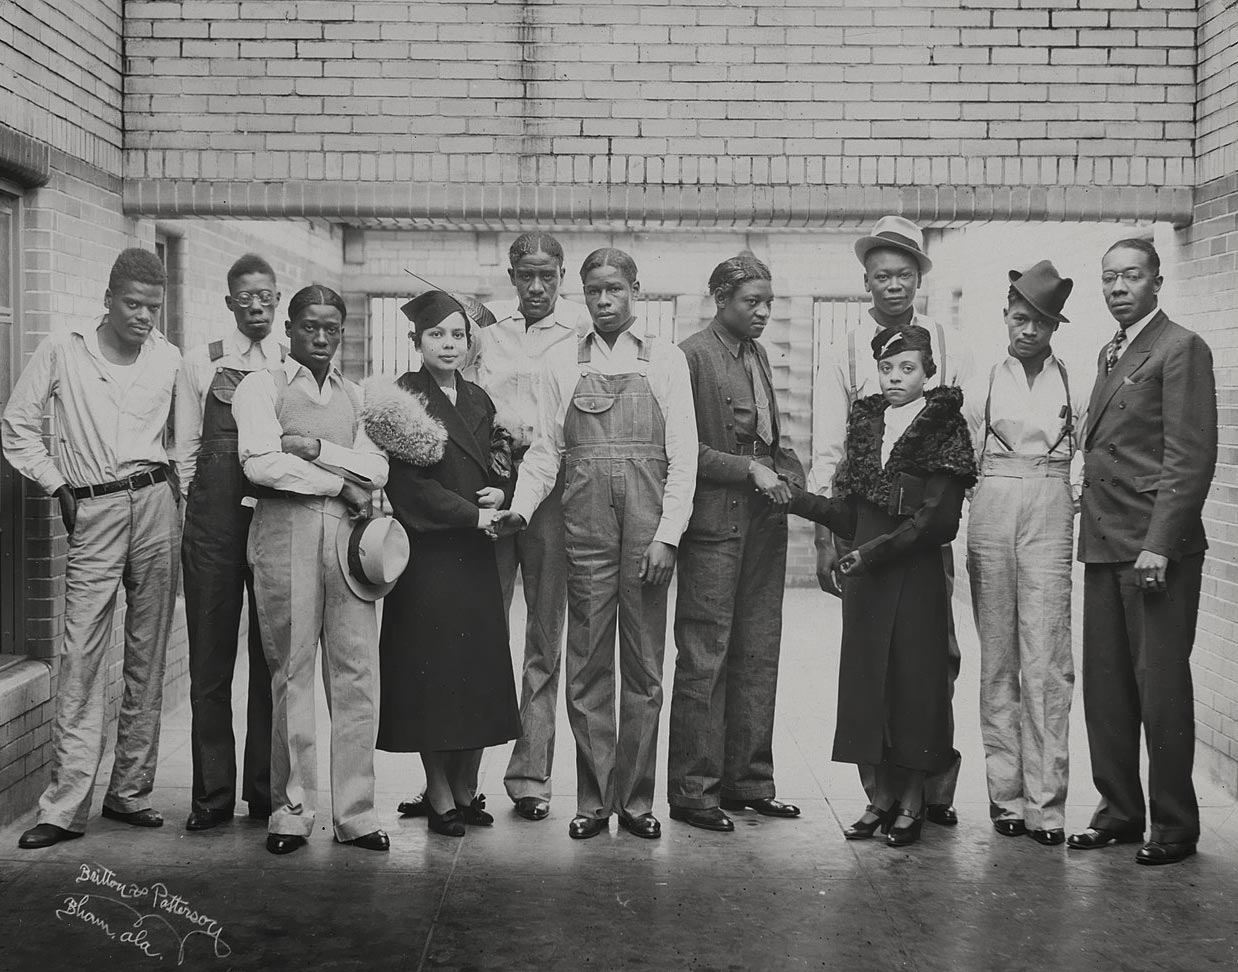 The Scottsboro Boys were nine African American teenagers and young men, ages 13 to 20, accused in Alabama of raping two white women in 1931